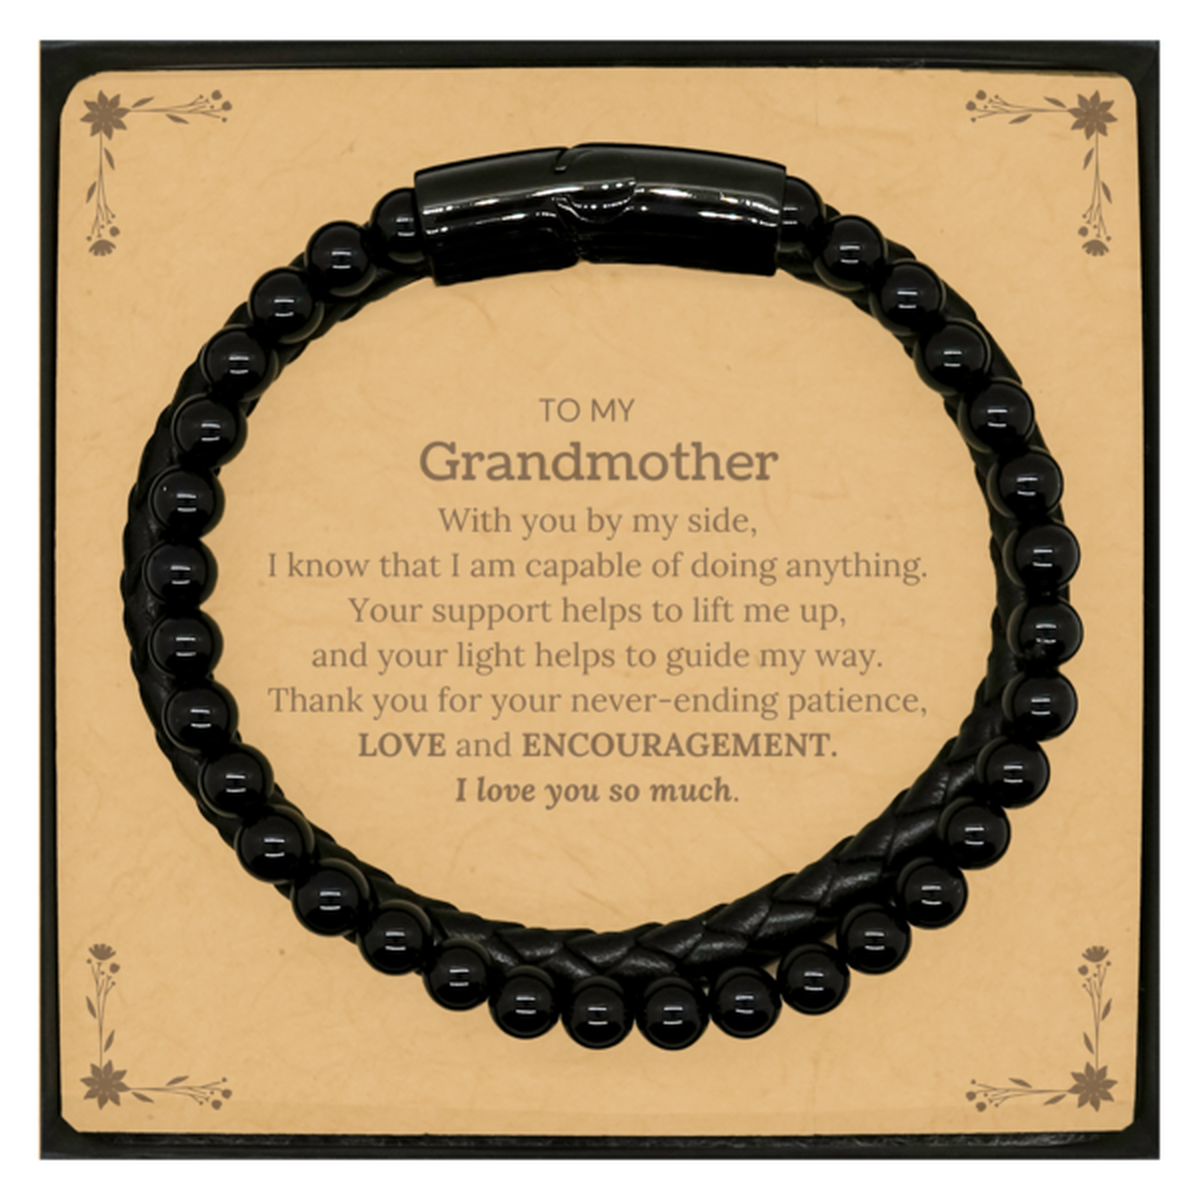 Appreciation Grandmother Stone Leather Bracelets Gifts, To My Grandmother Birthday Christmas Wedding Keepsake Gifts for Grandmother With you by my side, I know that I am capable of doing anything. I love you so much